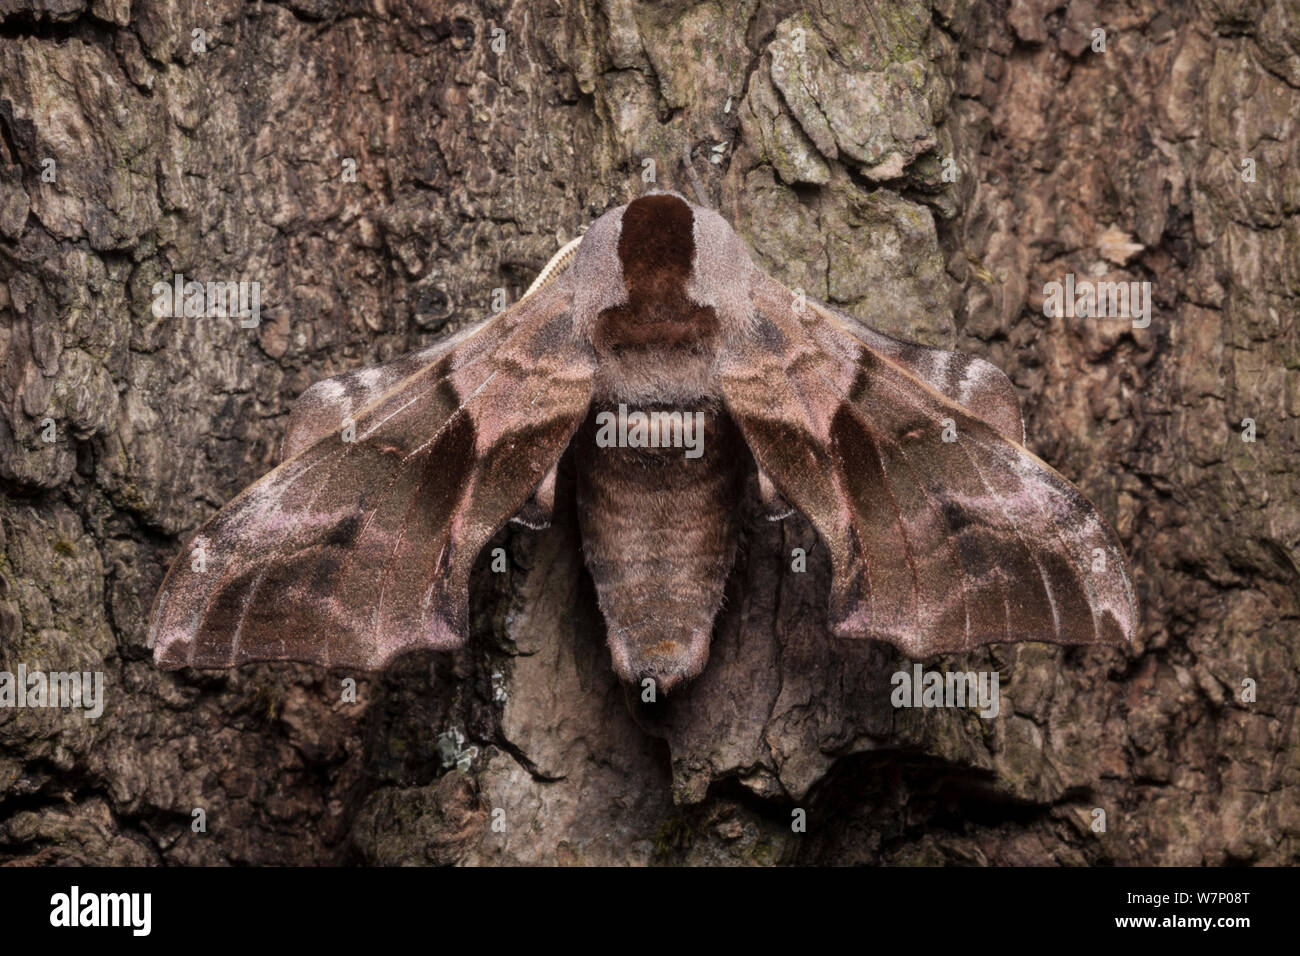 Eyed hawkmoth (Smerinthus ocellatus) at rest camouflaged on bark, Surrey, UK. Sequence 1 of 2. Stock Photo